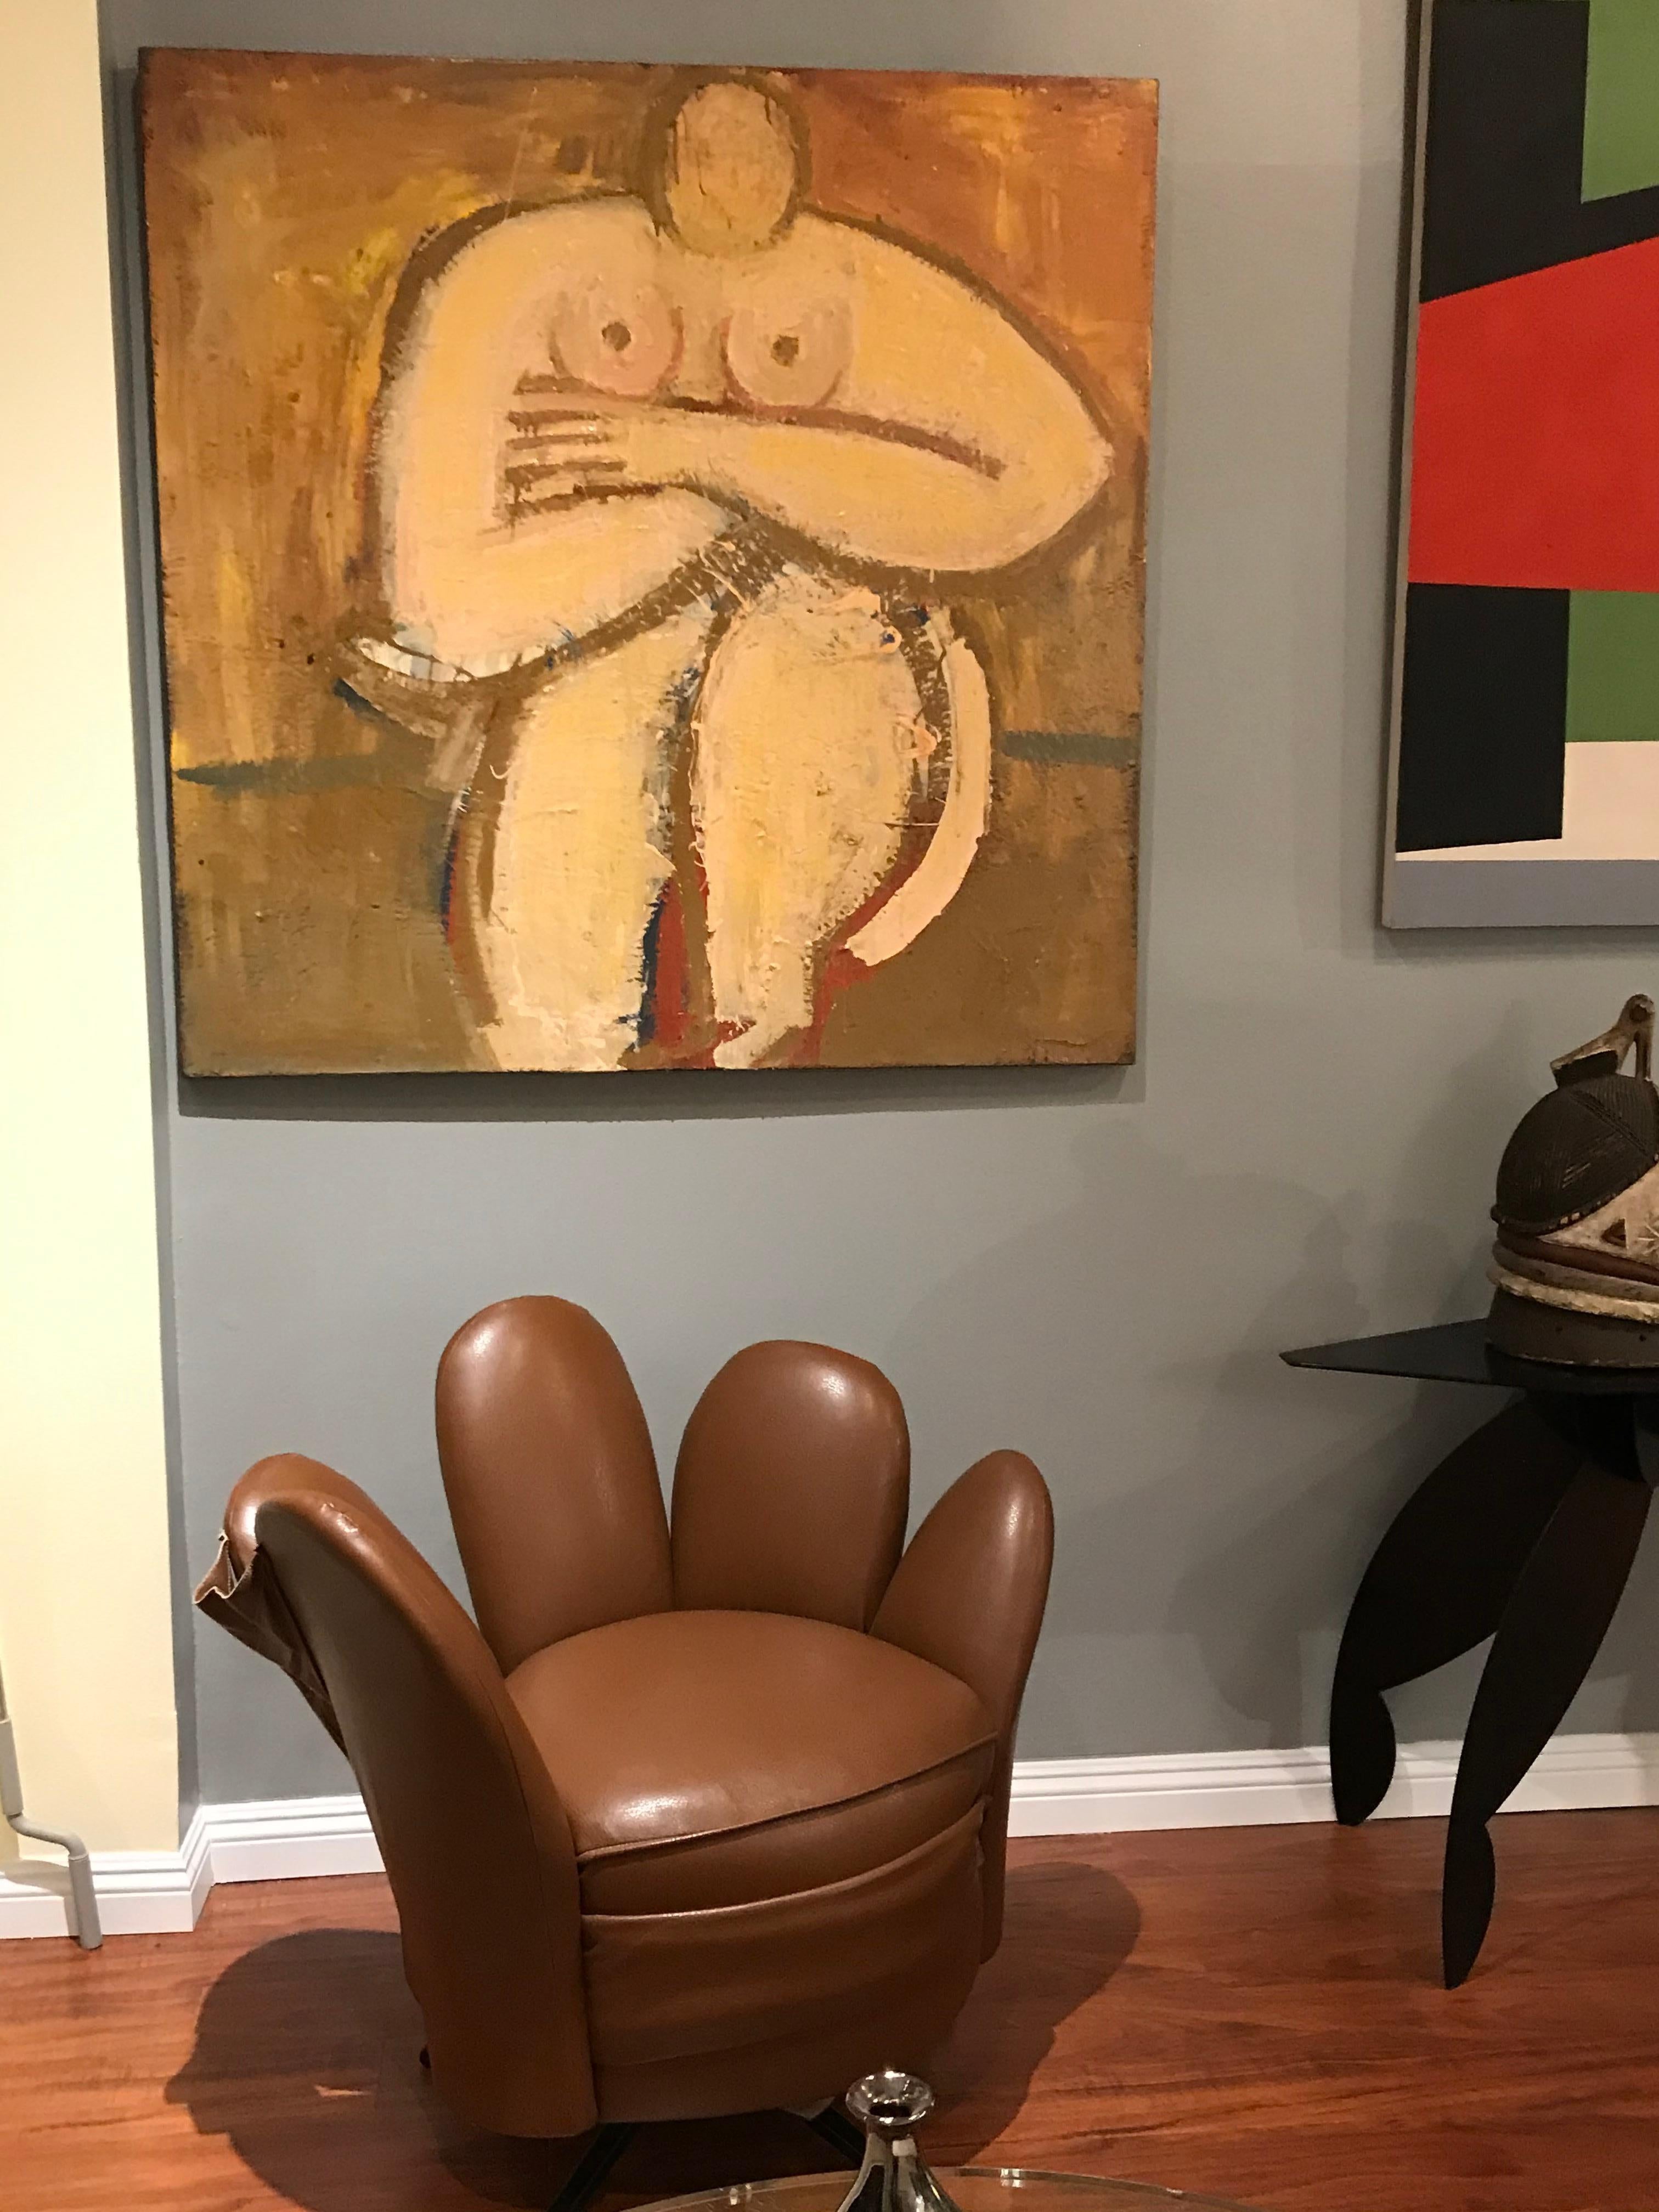 Outstanding strong oil painting of a nude reminding Fernando Botero by Barbara Dodge.
Painted with multiple layers of oil paint.
This frenetic painter never tried to sell her work in auction, which explains that we cannot find much on her!
This